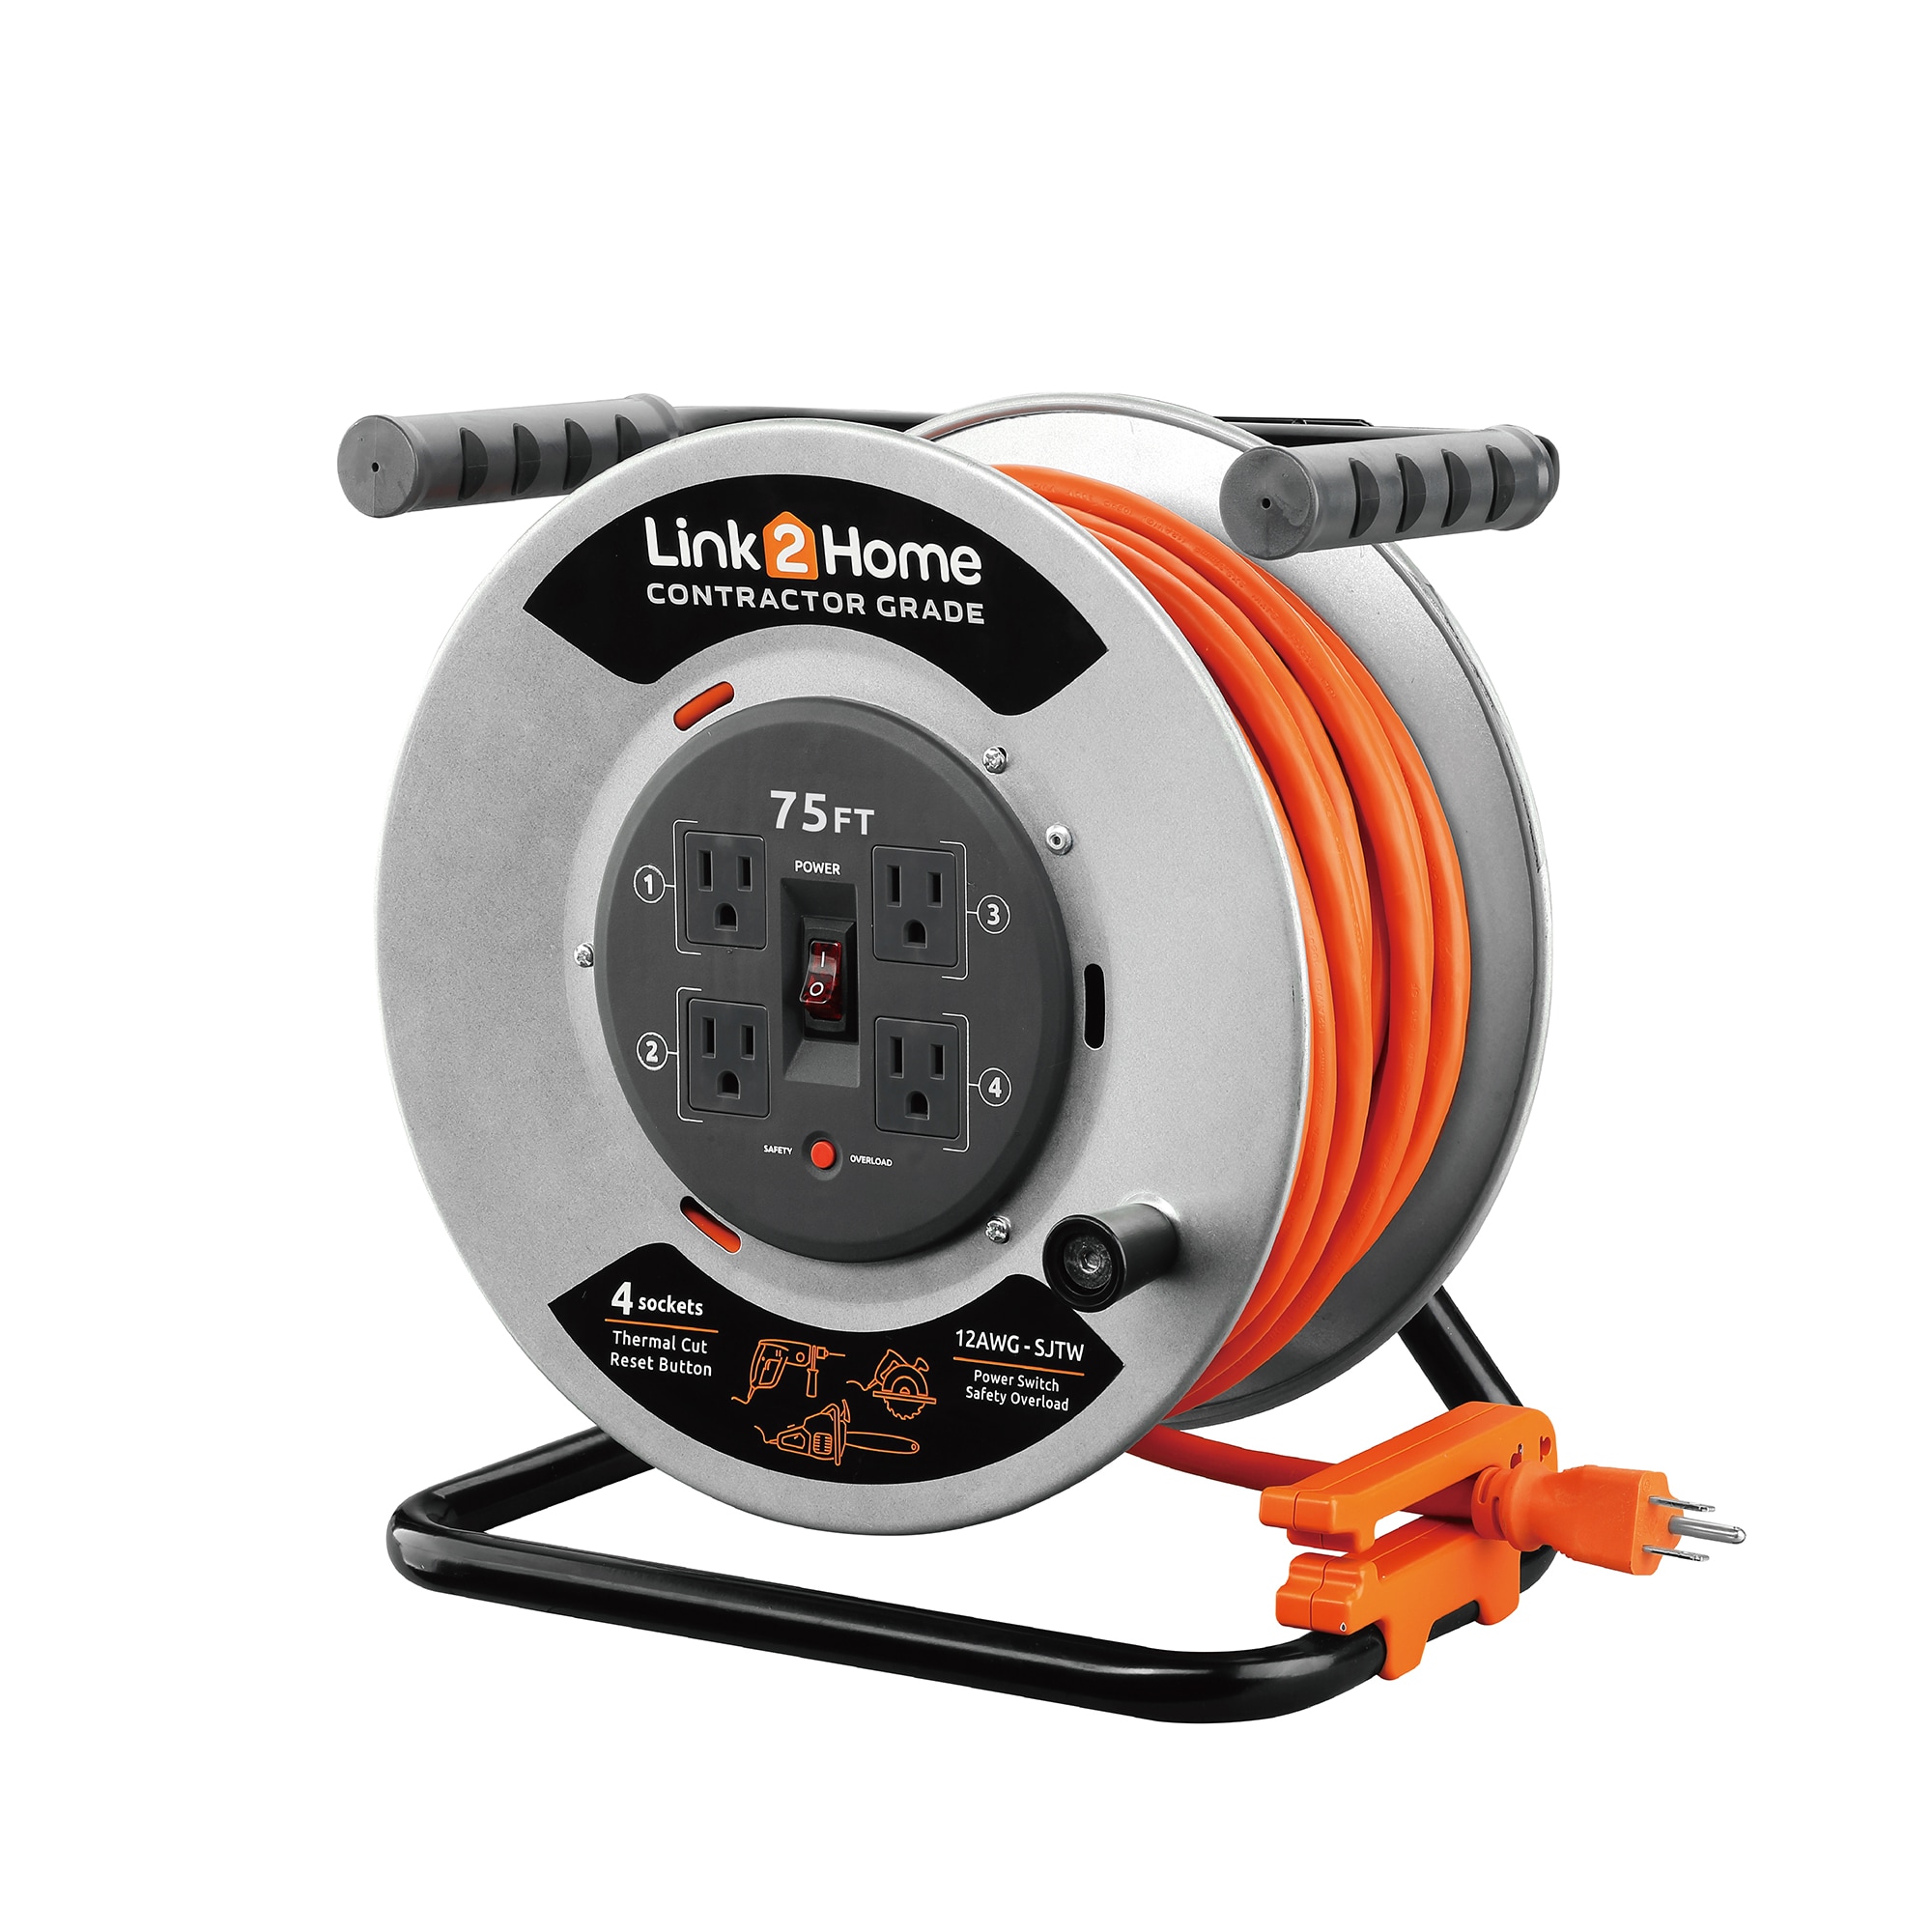 LINK2HOME Link2Home cord reel 75-ft 12 / 3-Prong Indoor Sjtw Heavy Duty General Extension Cord